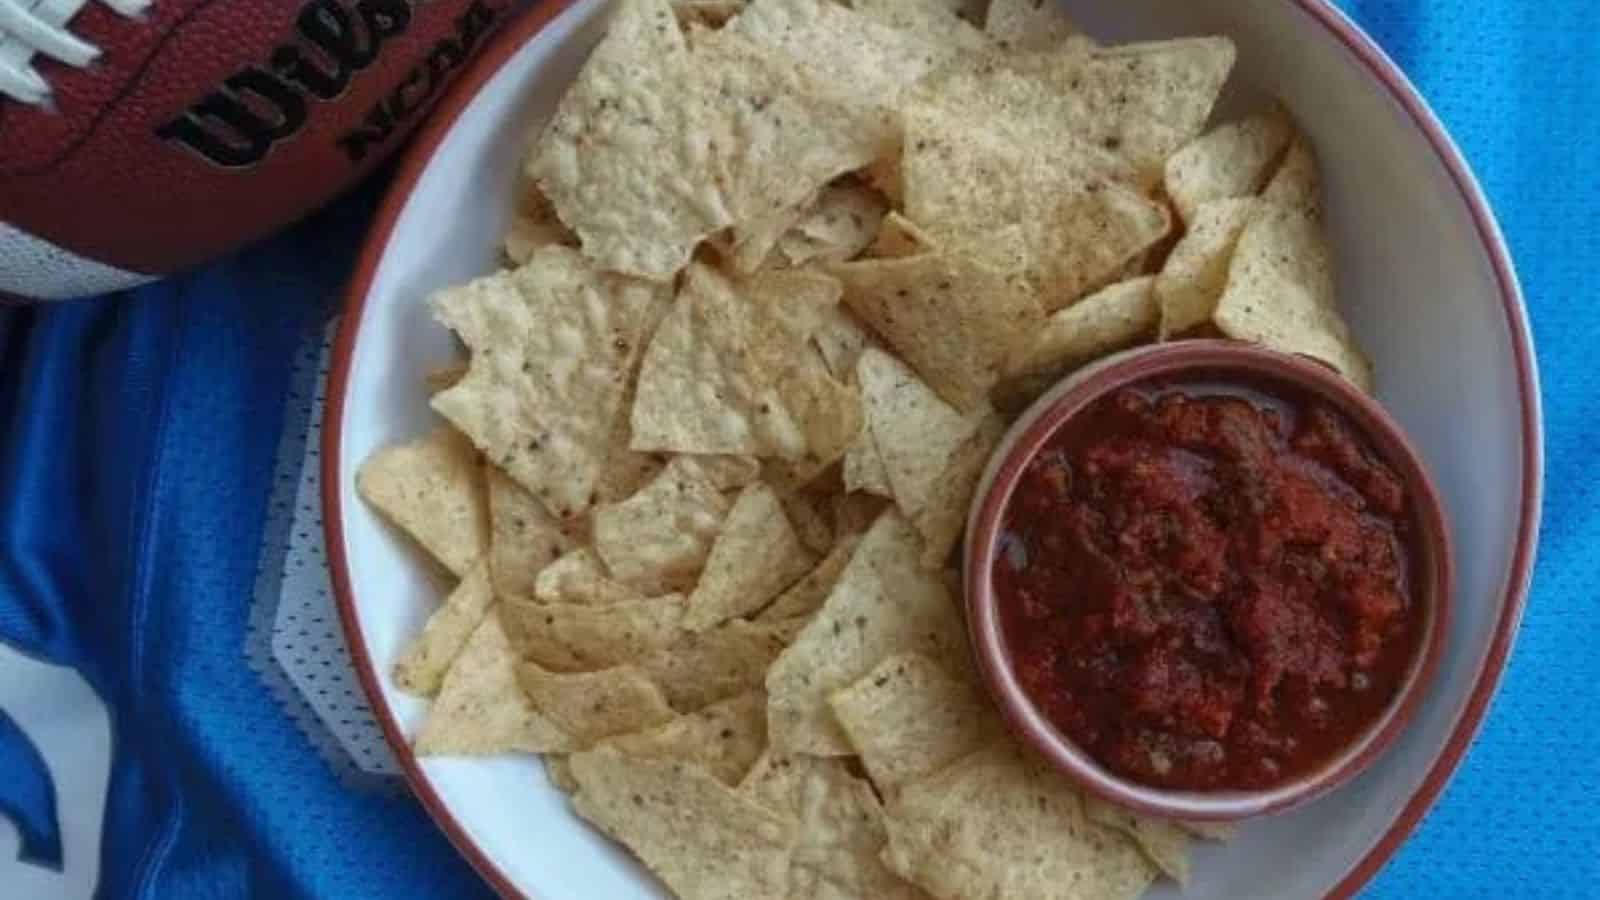 Bowl of chips with salsa and a football on a jersey.